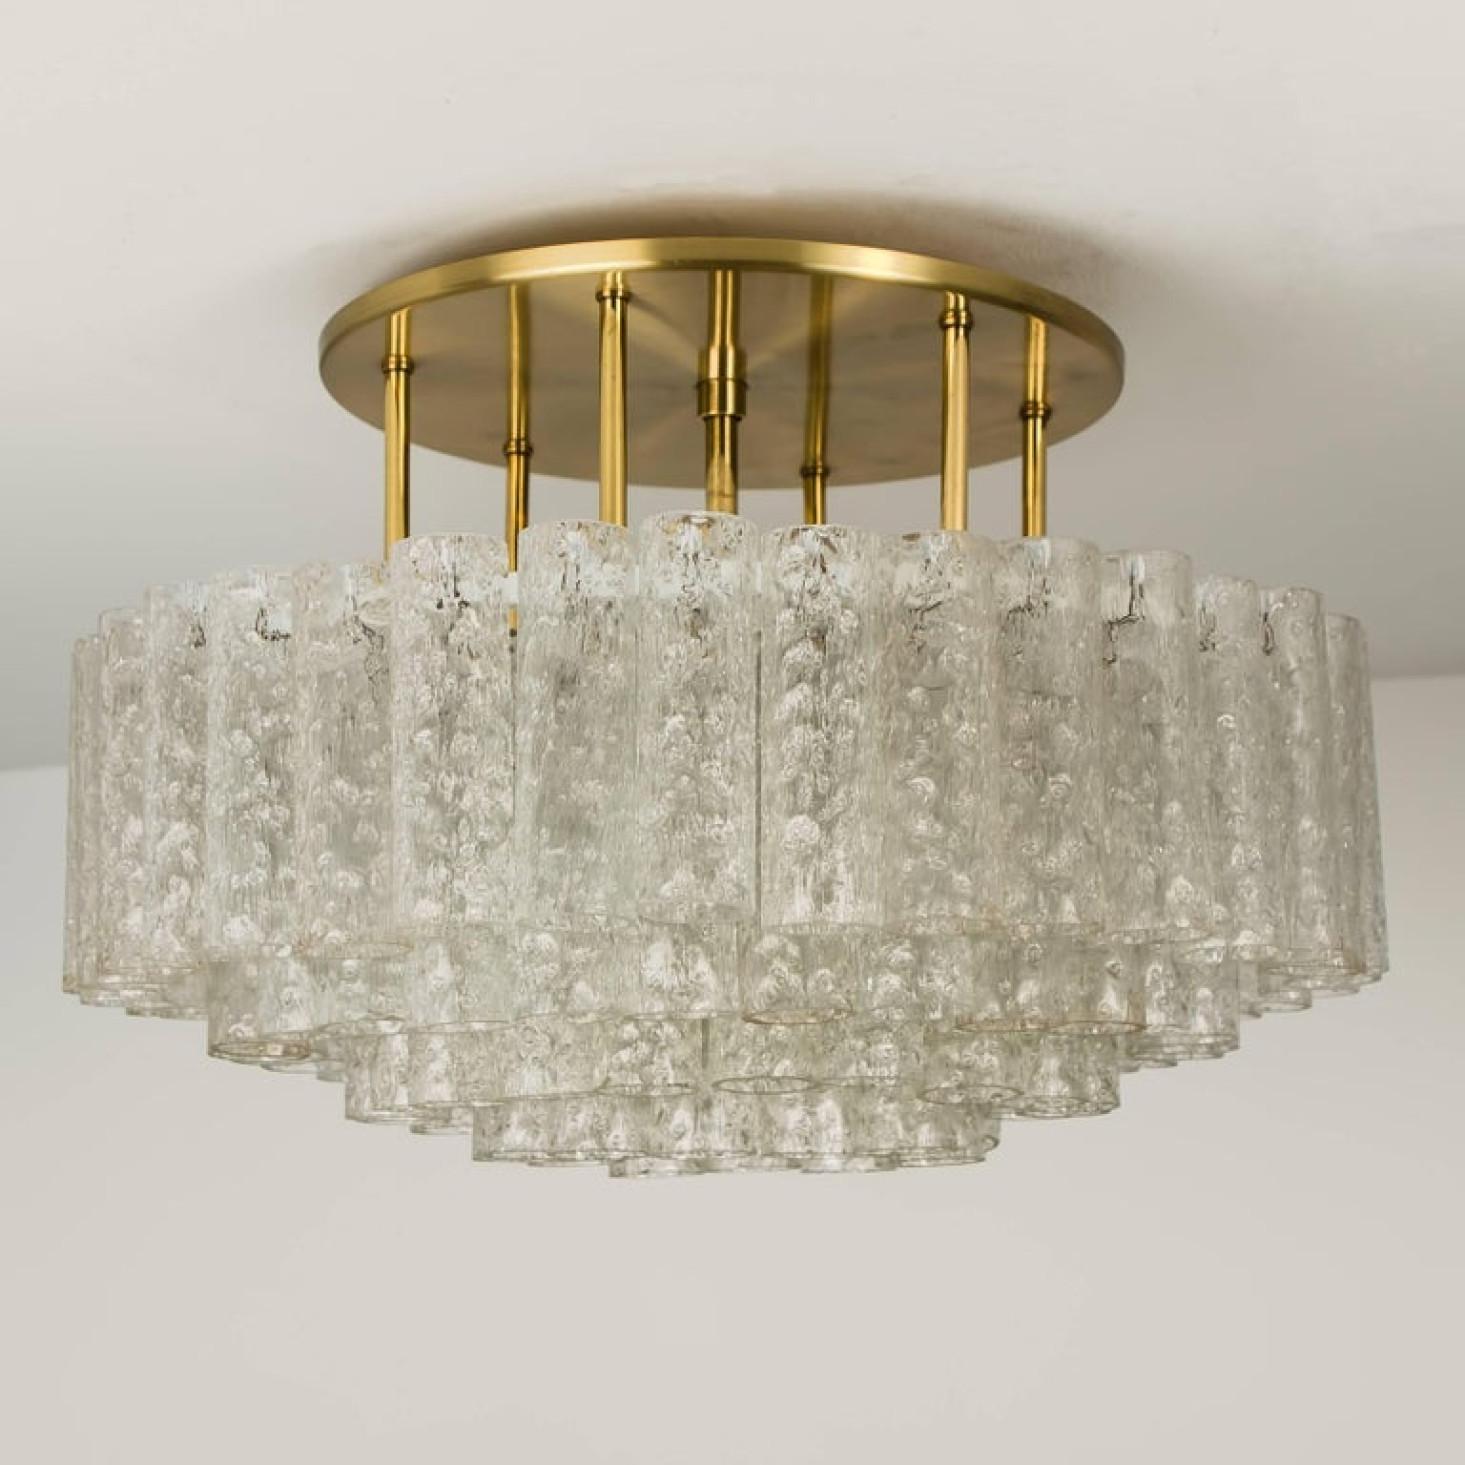 One of the Six Large Blown Glass Brass Flush Mount Light Fixtures by Doria 1960s For Sale 12